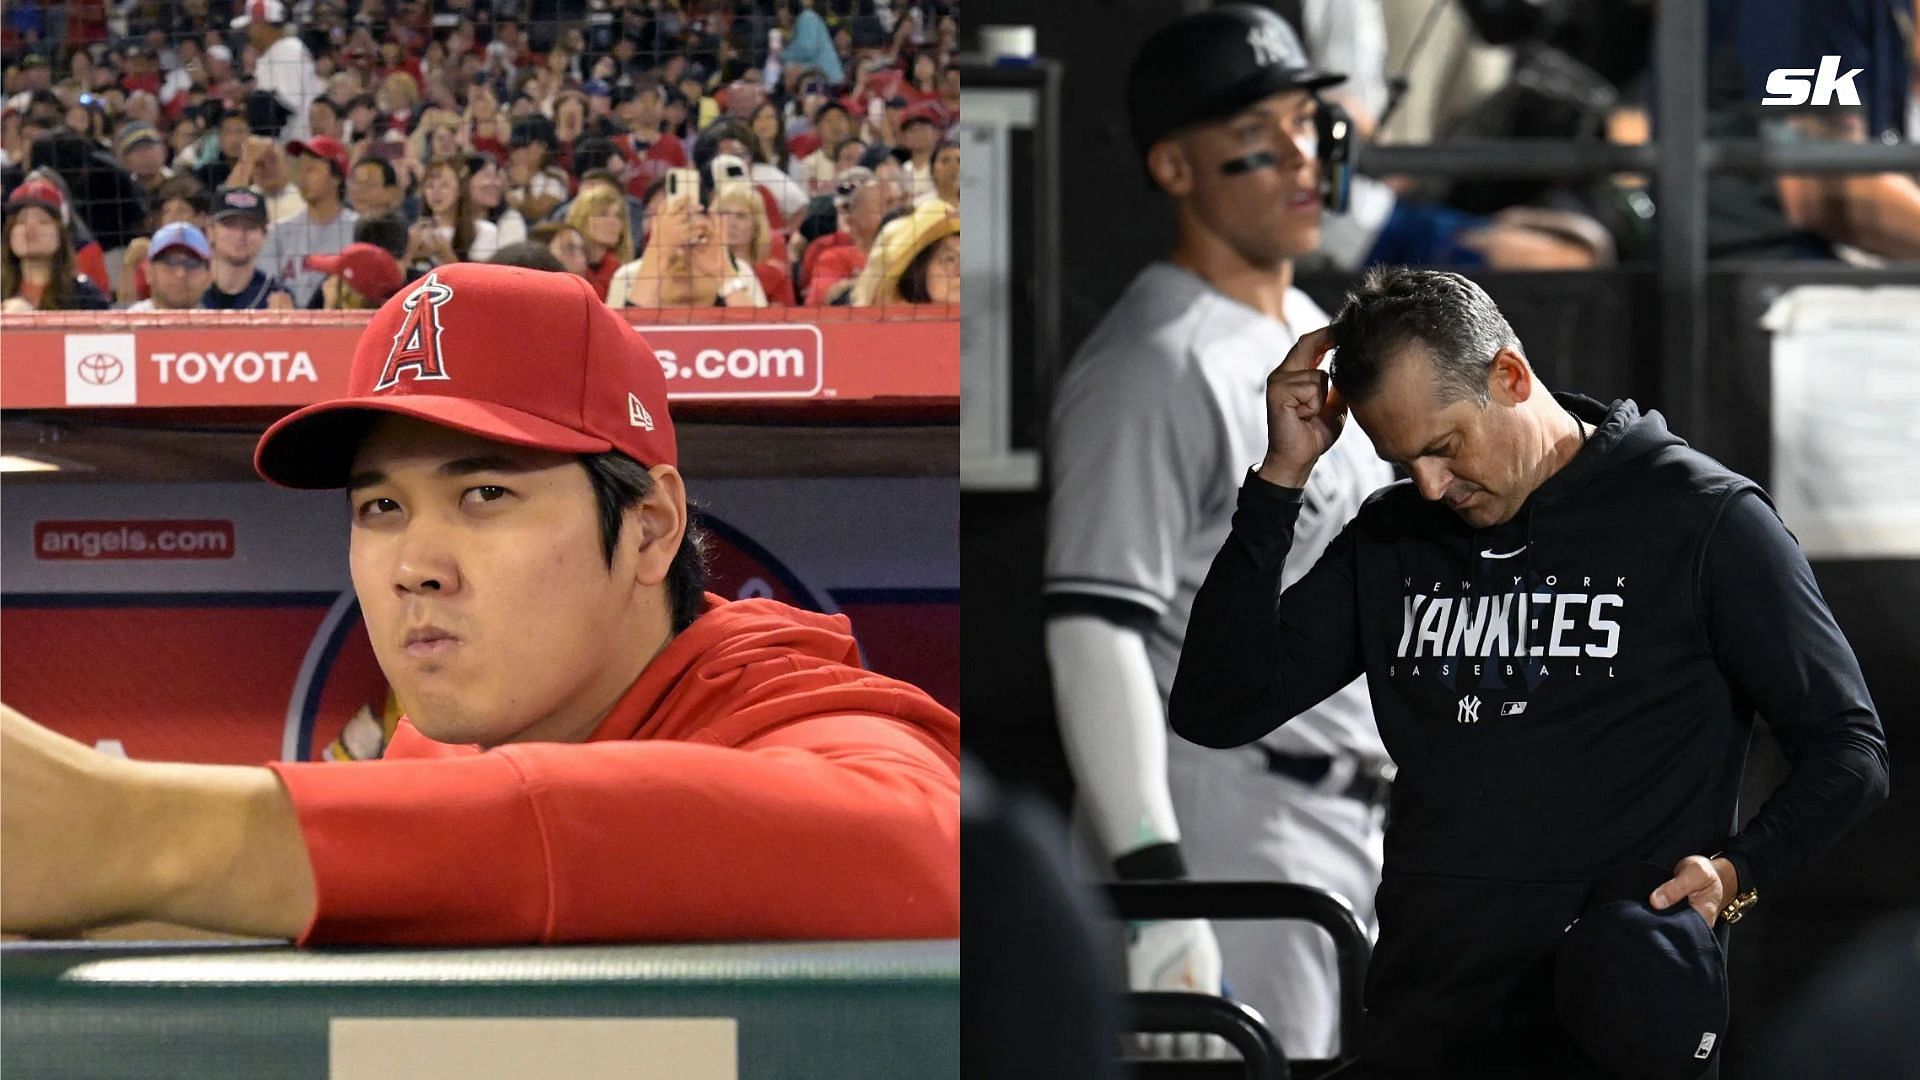 Shohei Ohtani Free Agnecy News: New York Not in Sight